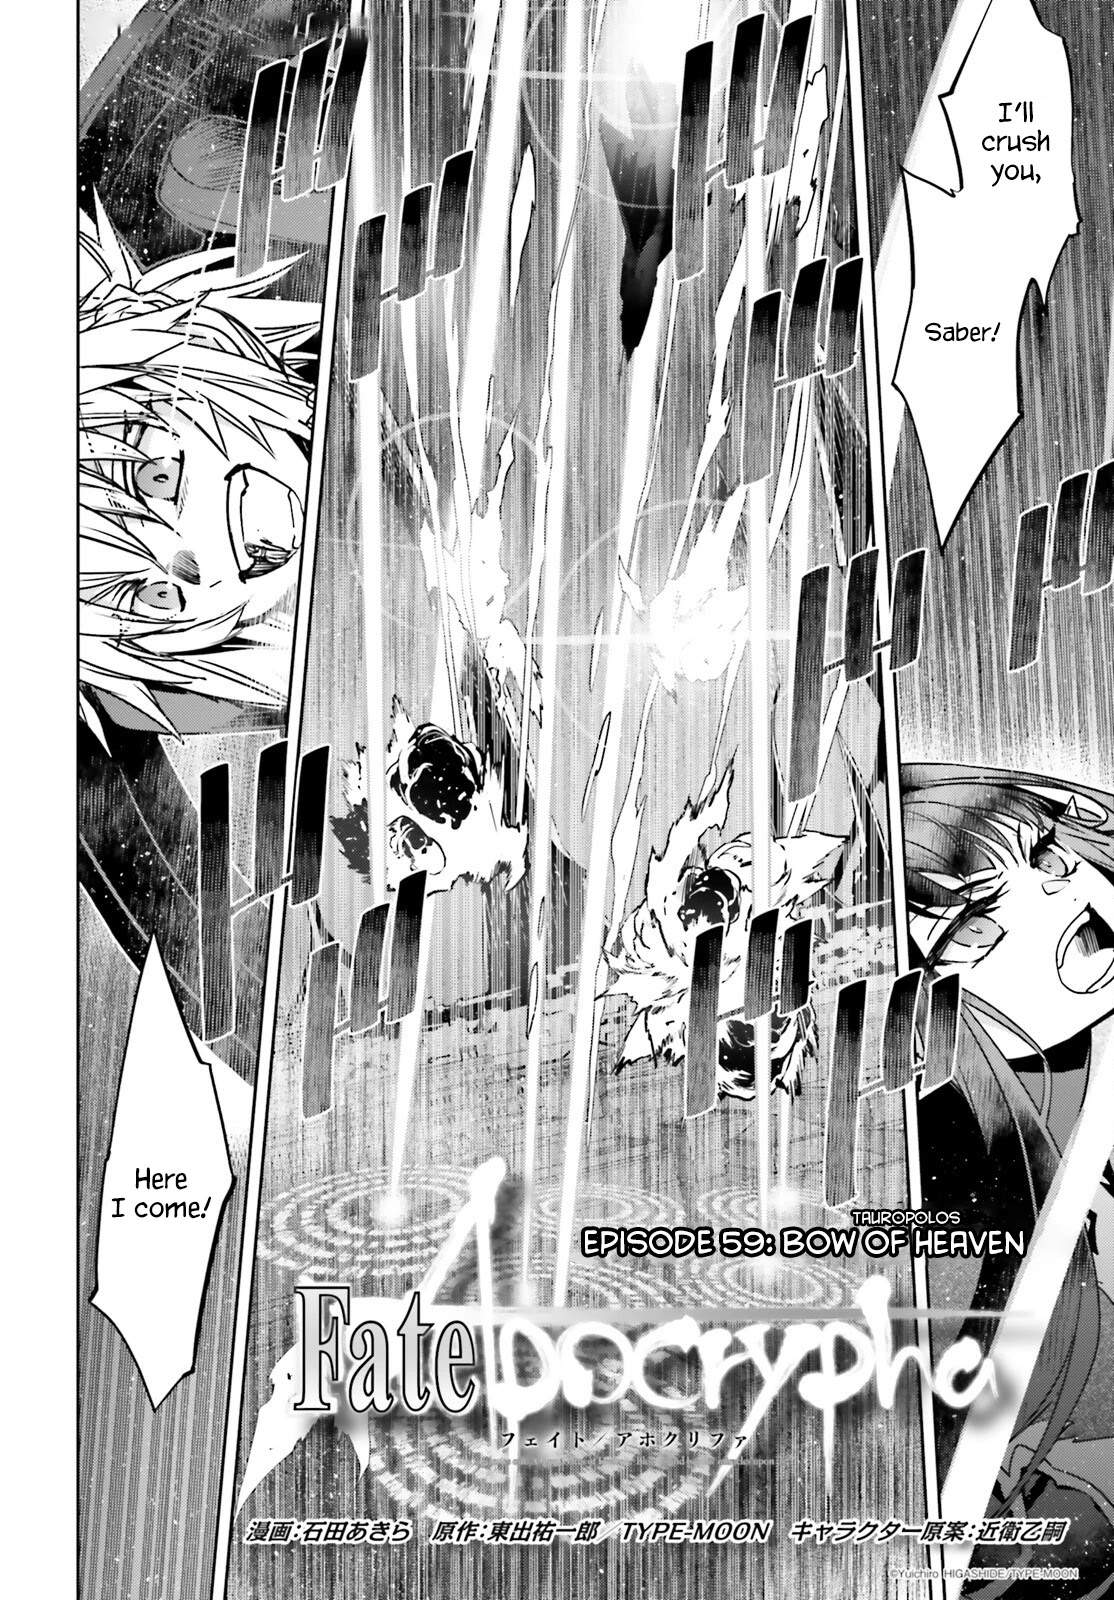 Fate/apocrypha Chapter 59: Episode: 59 Bow Of Heaven - Picture 2